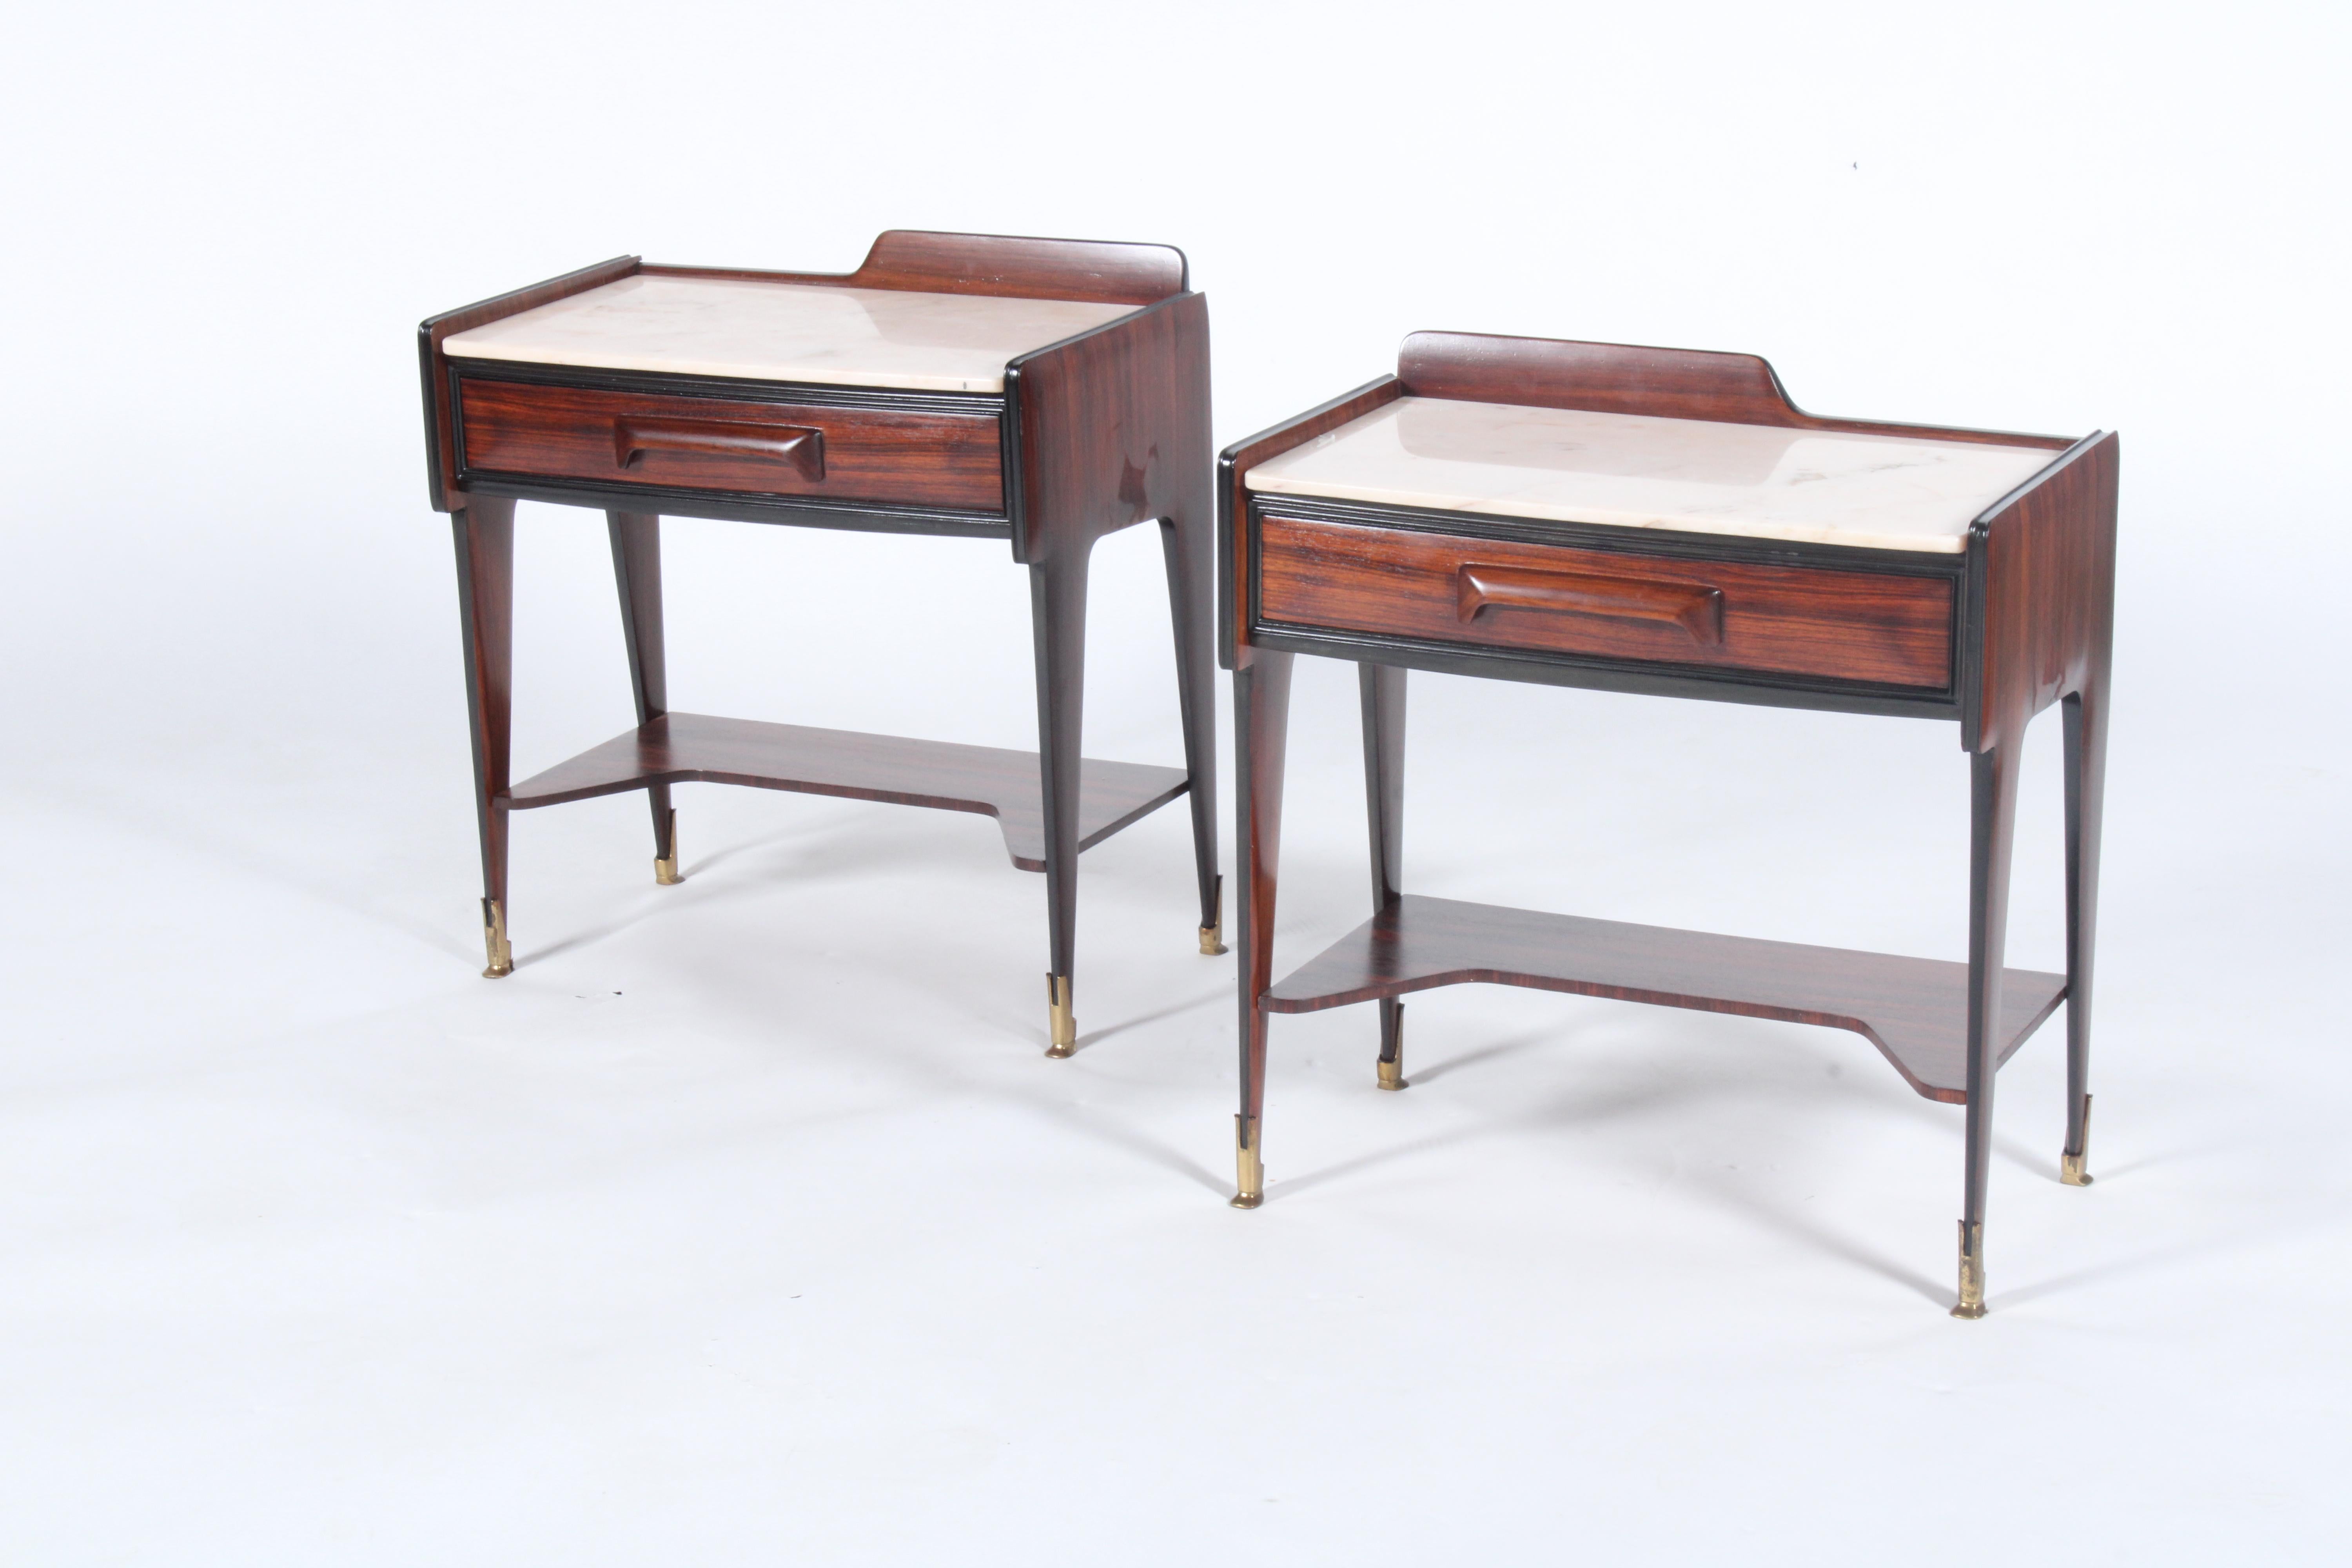 Attributed to Vittorio Dassi this stunning pair of of original mid century Italian bedside tables are in rosewood with ebonised and brass detailing along with beautiful original marble tops. Storage is offered in the form of a pull out drawer and